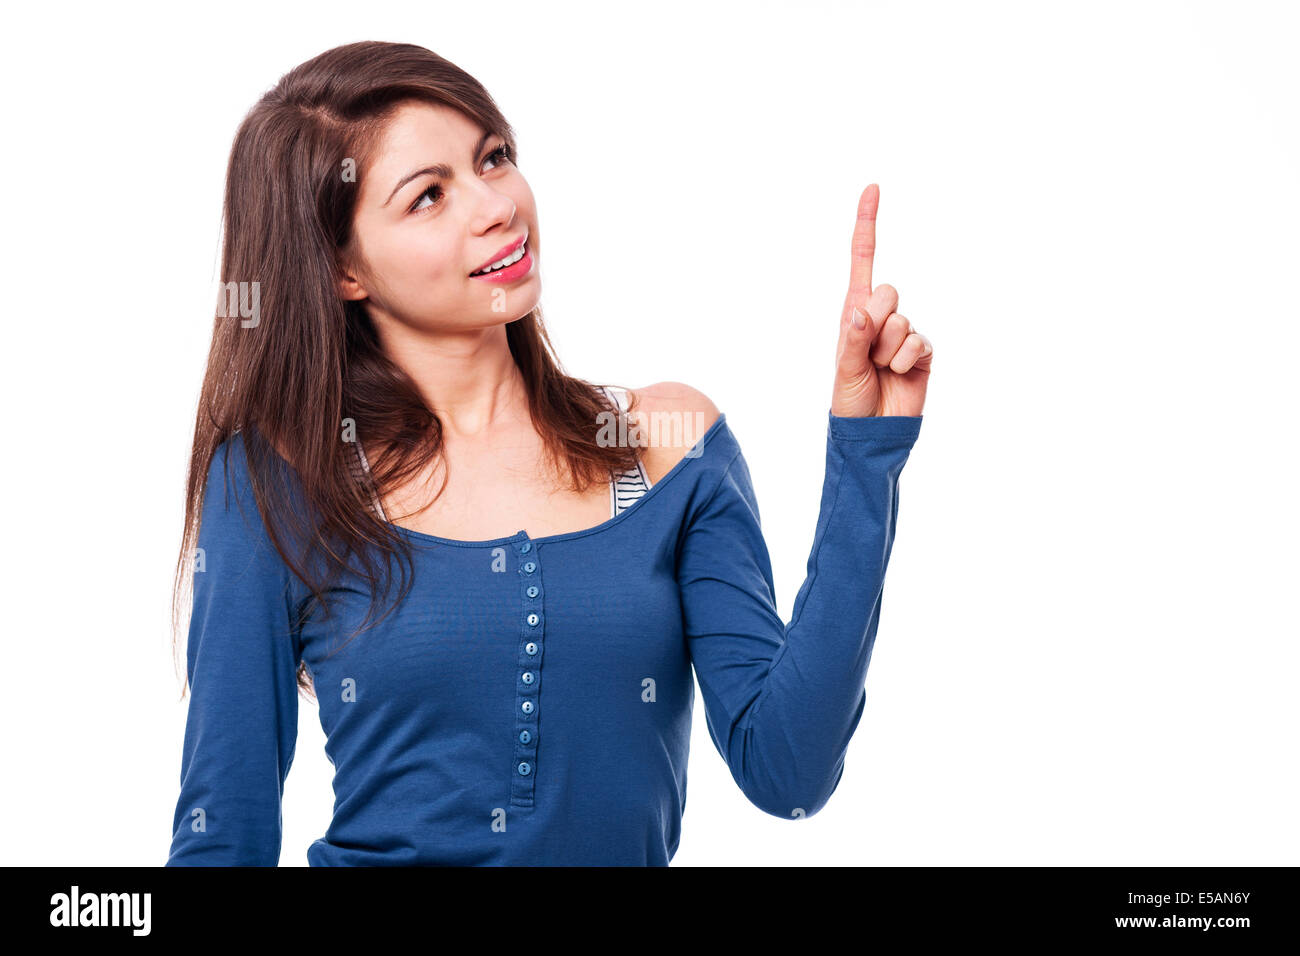 Smiling young woman gesturing the index finger Debica, Poland Stock Photo